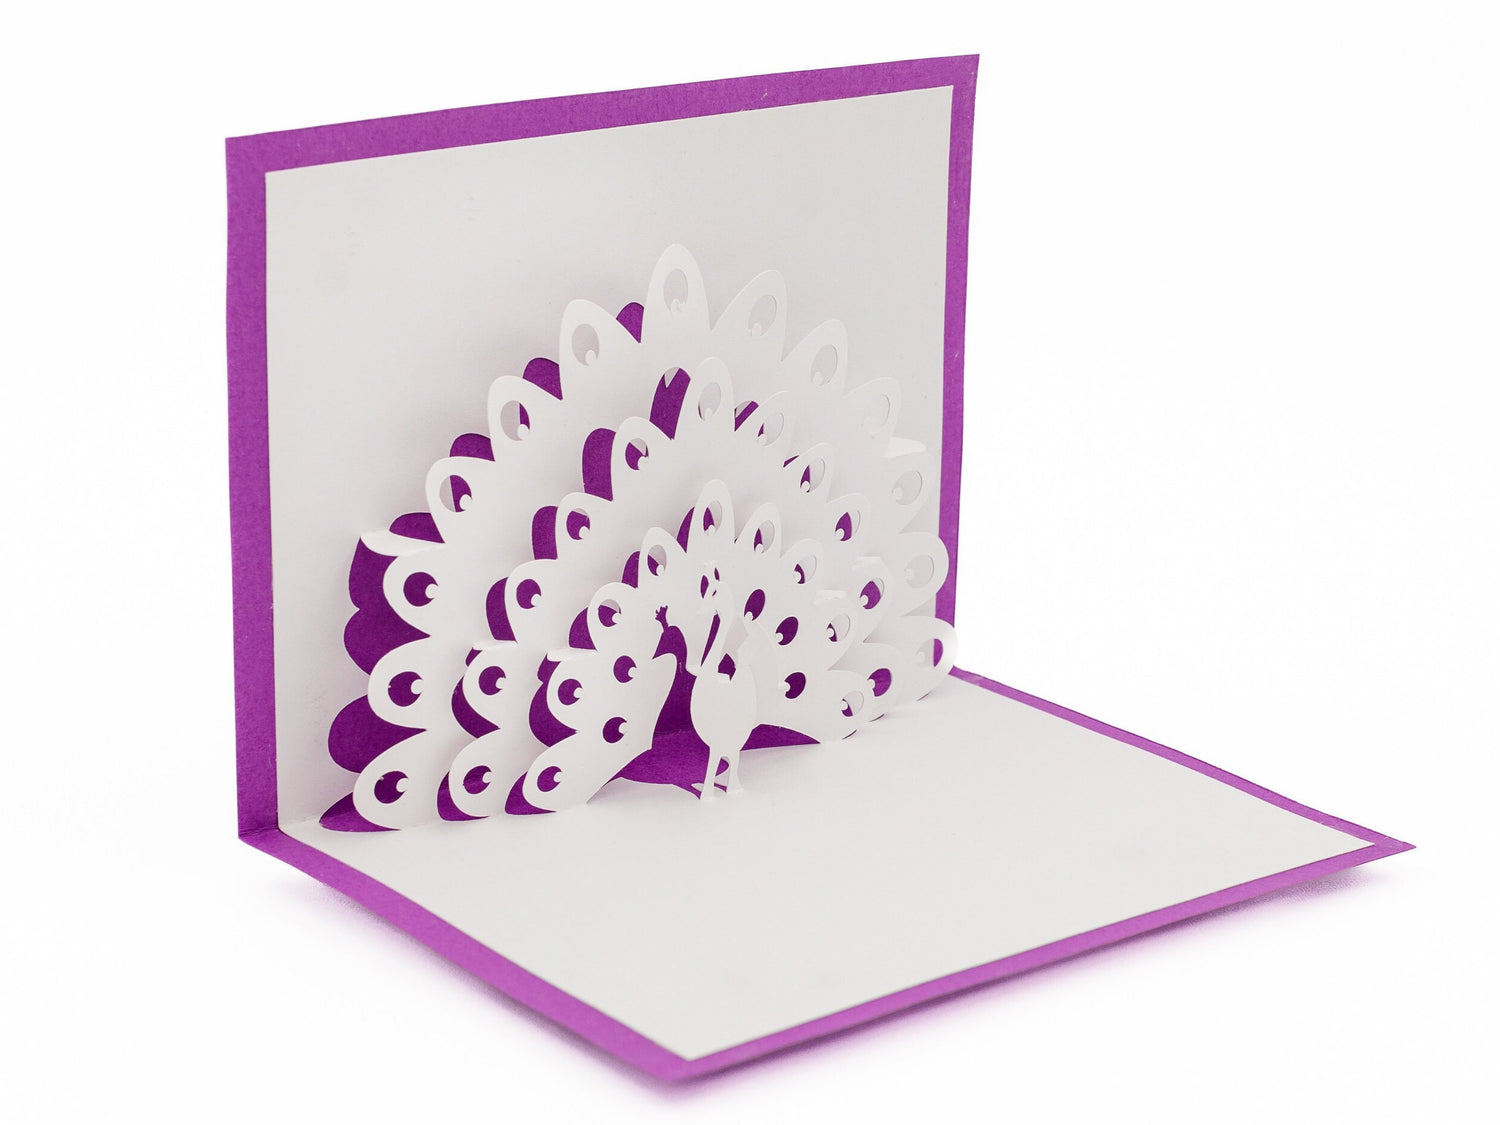 Peacock Pop Up 3D Greeting Card